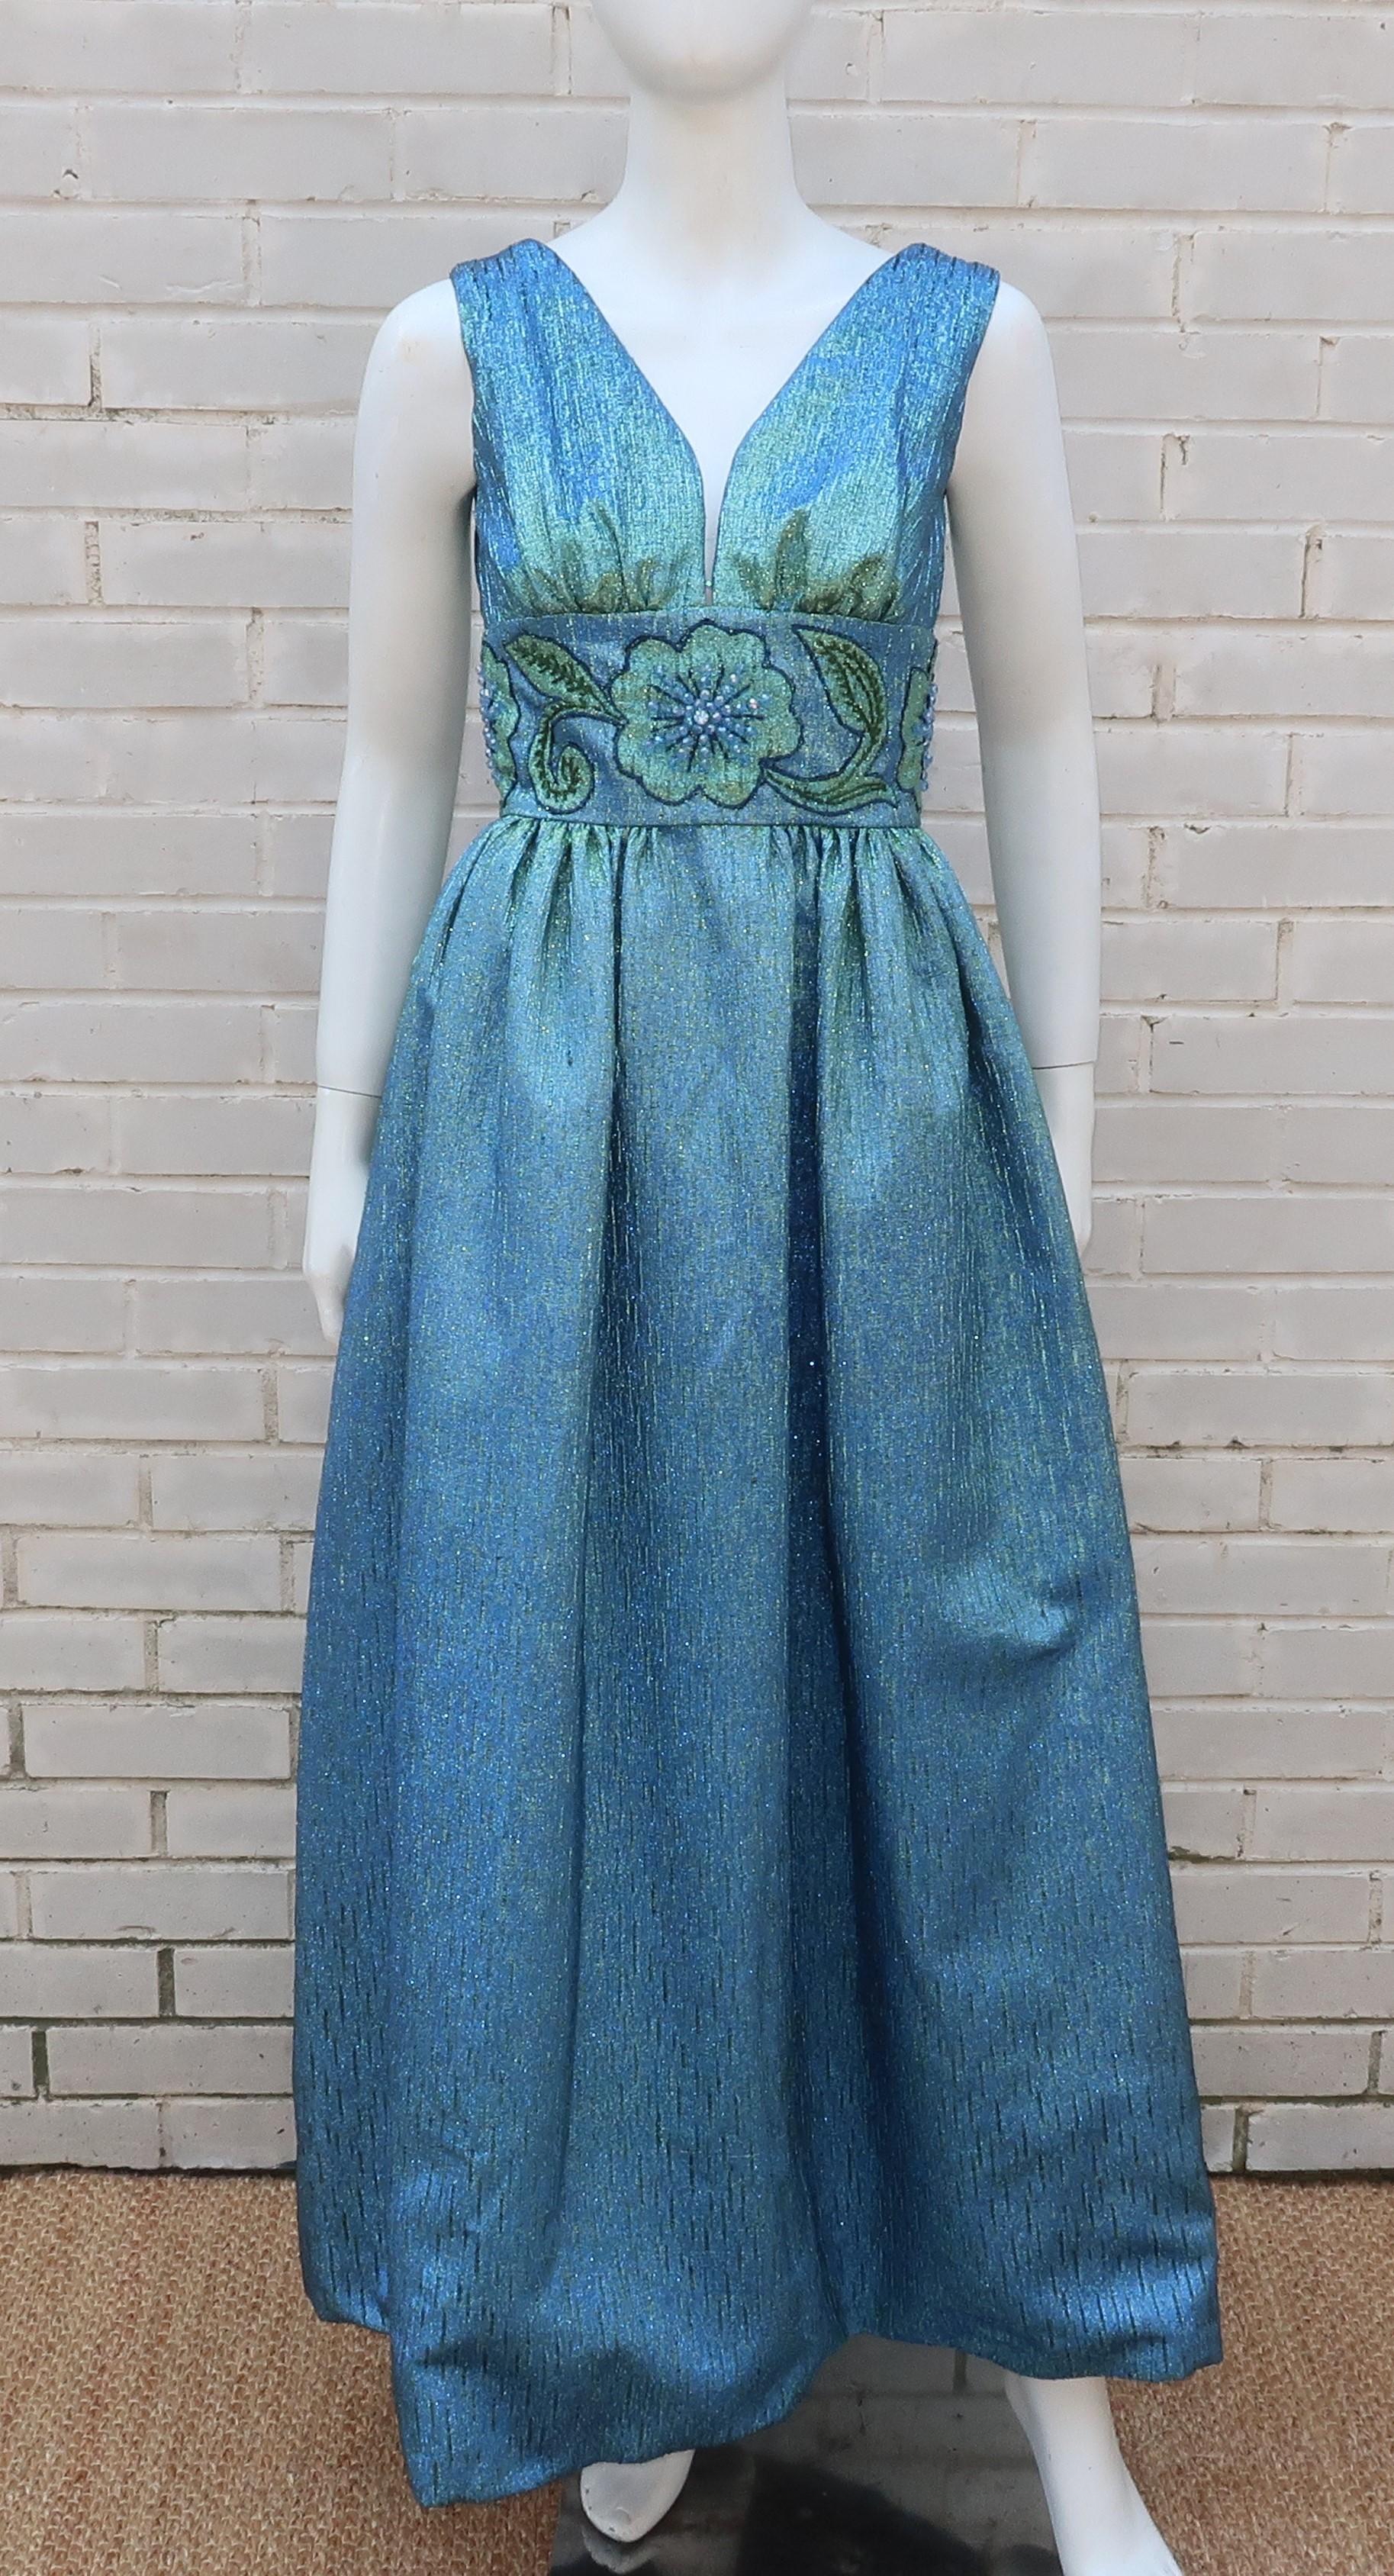 1960's Jean of California evening dress with a sparkling metallic fabric in an eye-catching iridescent green and blue.  It zips and hooks at the v-back with a cummerbund style waist which is decorated with a floral design accented by light blue and